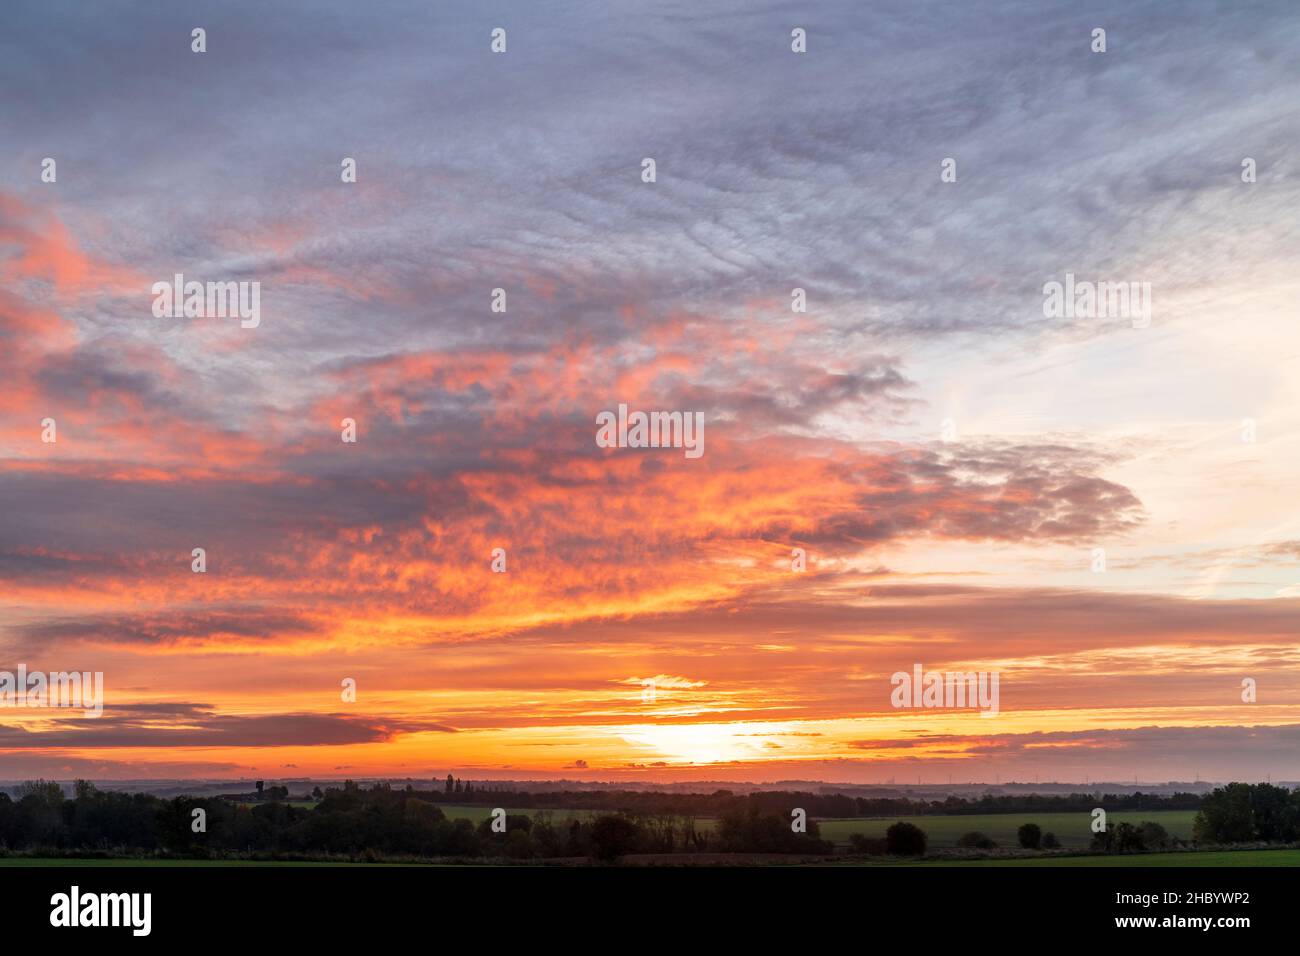 Dawn landscape of fields and rows of trees in Kent, England. Orange sky on the horizon with layers of cloud underlit by the hidden rising sun. Stock Photo